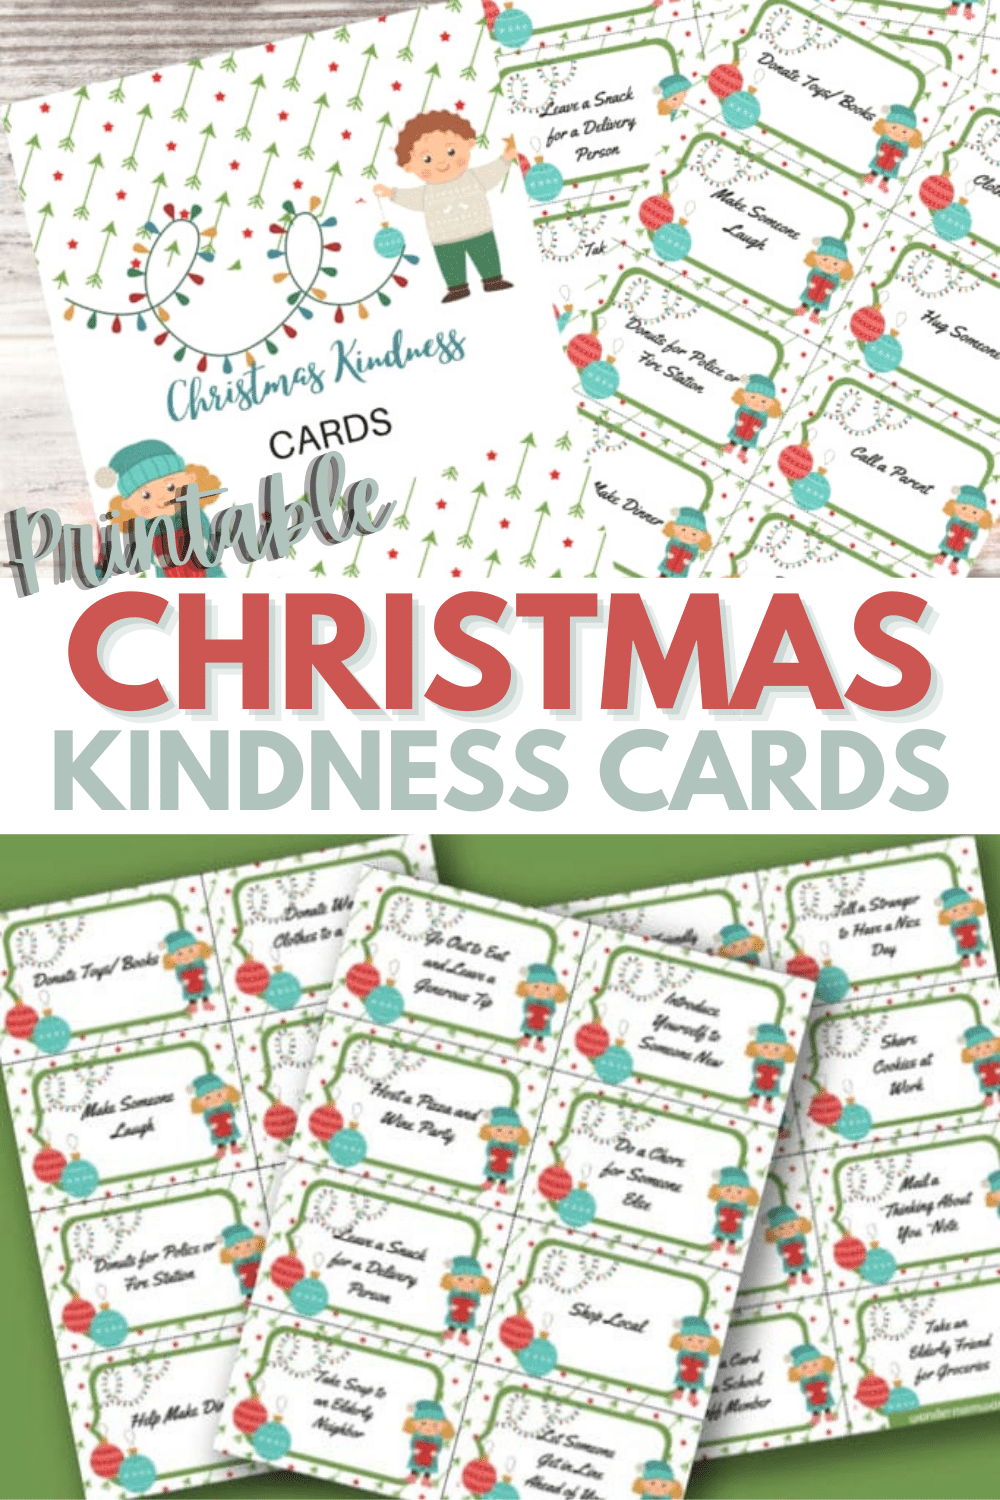 Printable Christmas kindness cards are the perfect way to spread joy and goodwill during the holiday season. These cards can be easily printed at home and then shared with family, friends, and even strangers as a